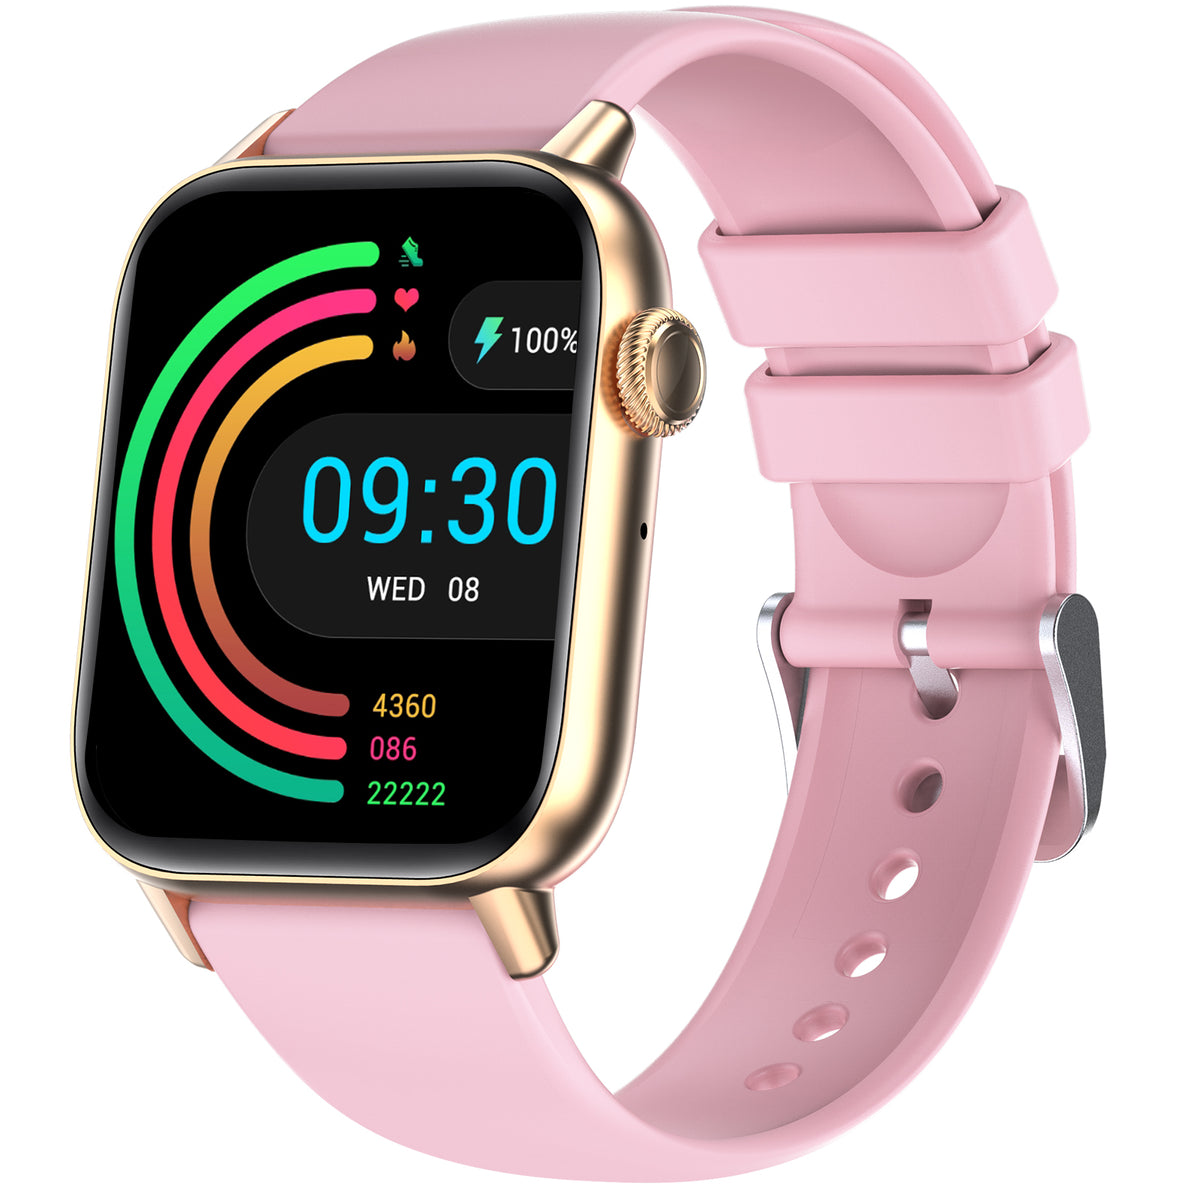 Smart Watch for Women with Call Make Receive and Text 1.83 inch HD Full Touch Screen Smartwatch for Android and iOS Phones IP67 Waterproof Fitness Tracker